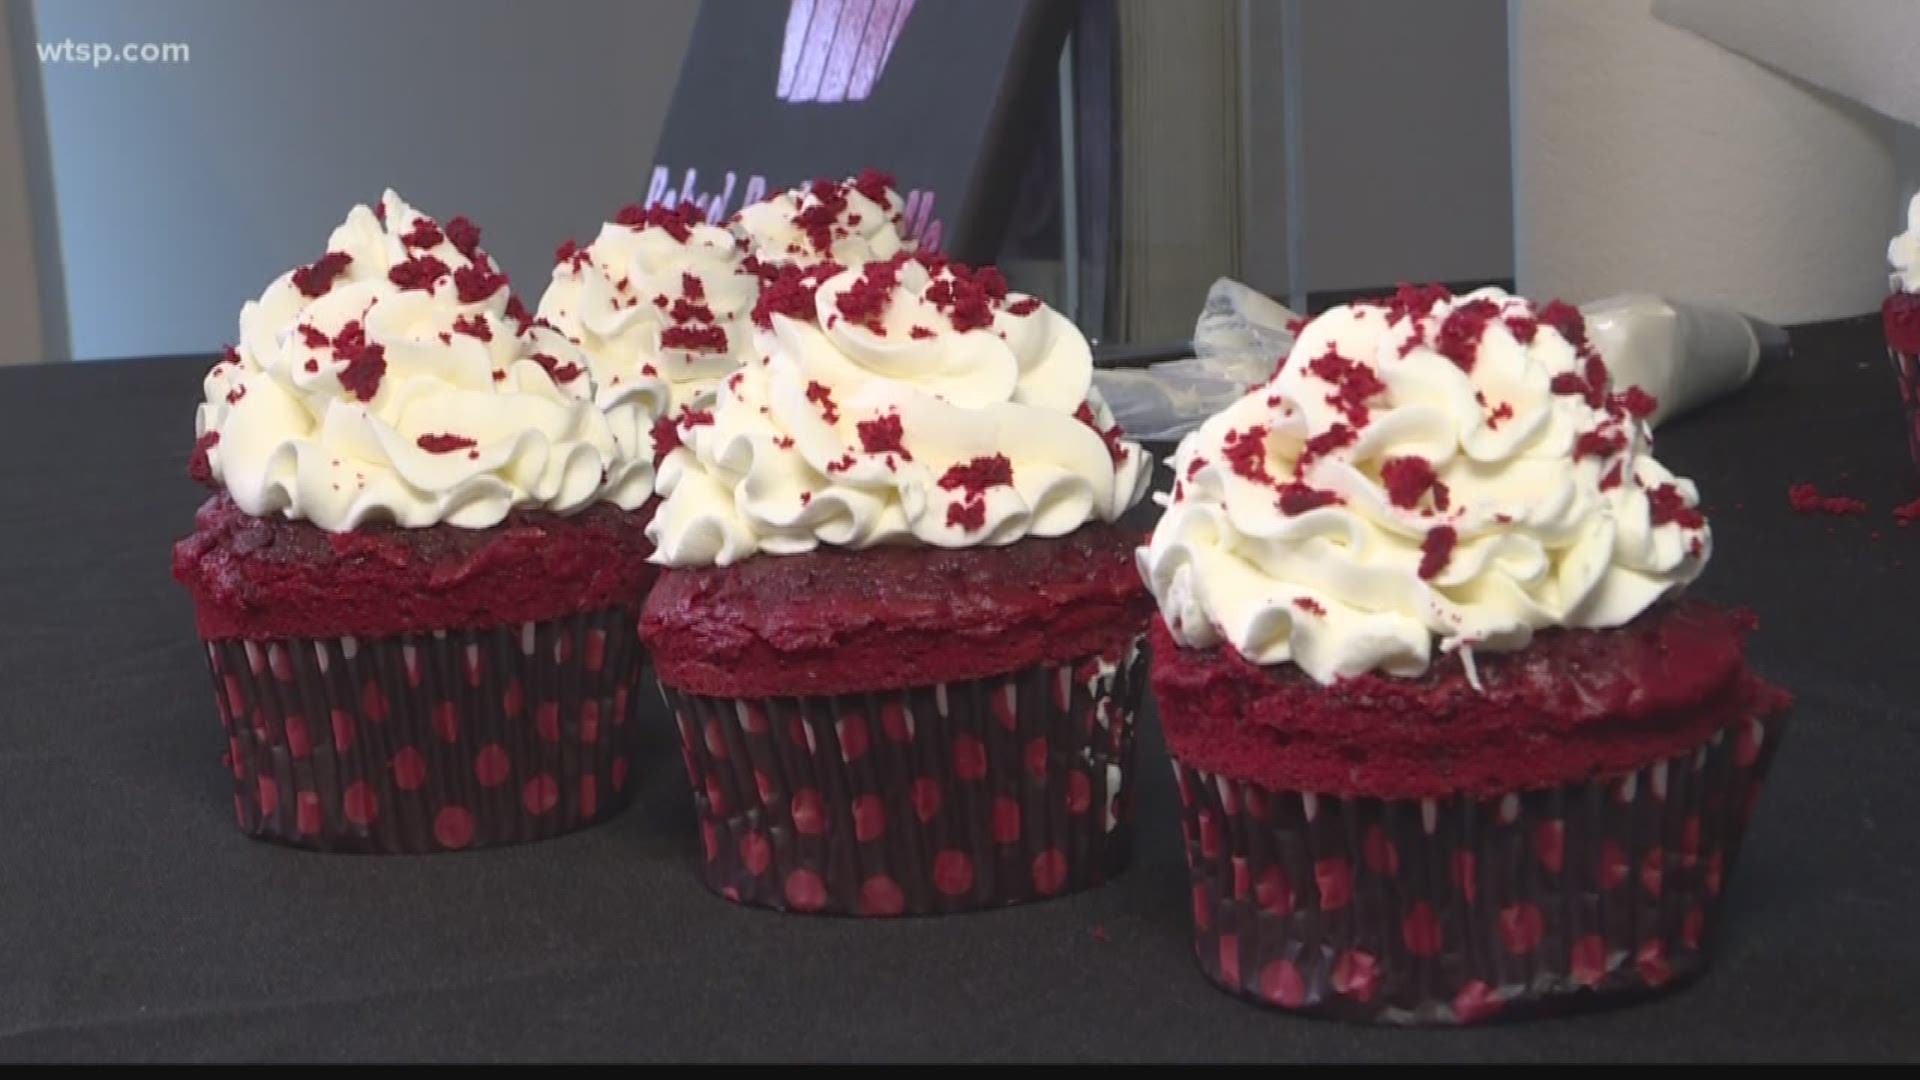 The cupcake contest will be held Saturday at 420 22nd Street South. The event goes from noon to 3 p.m. https://on.wtsp.com/2yrGK6k